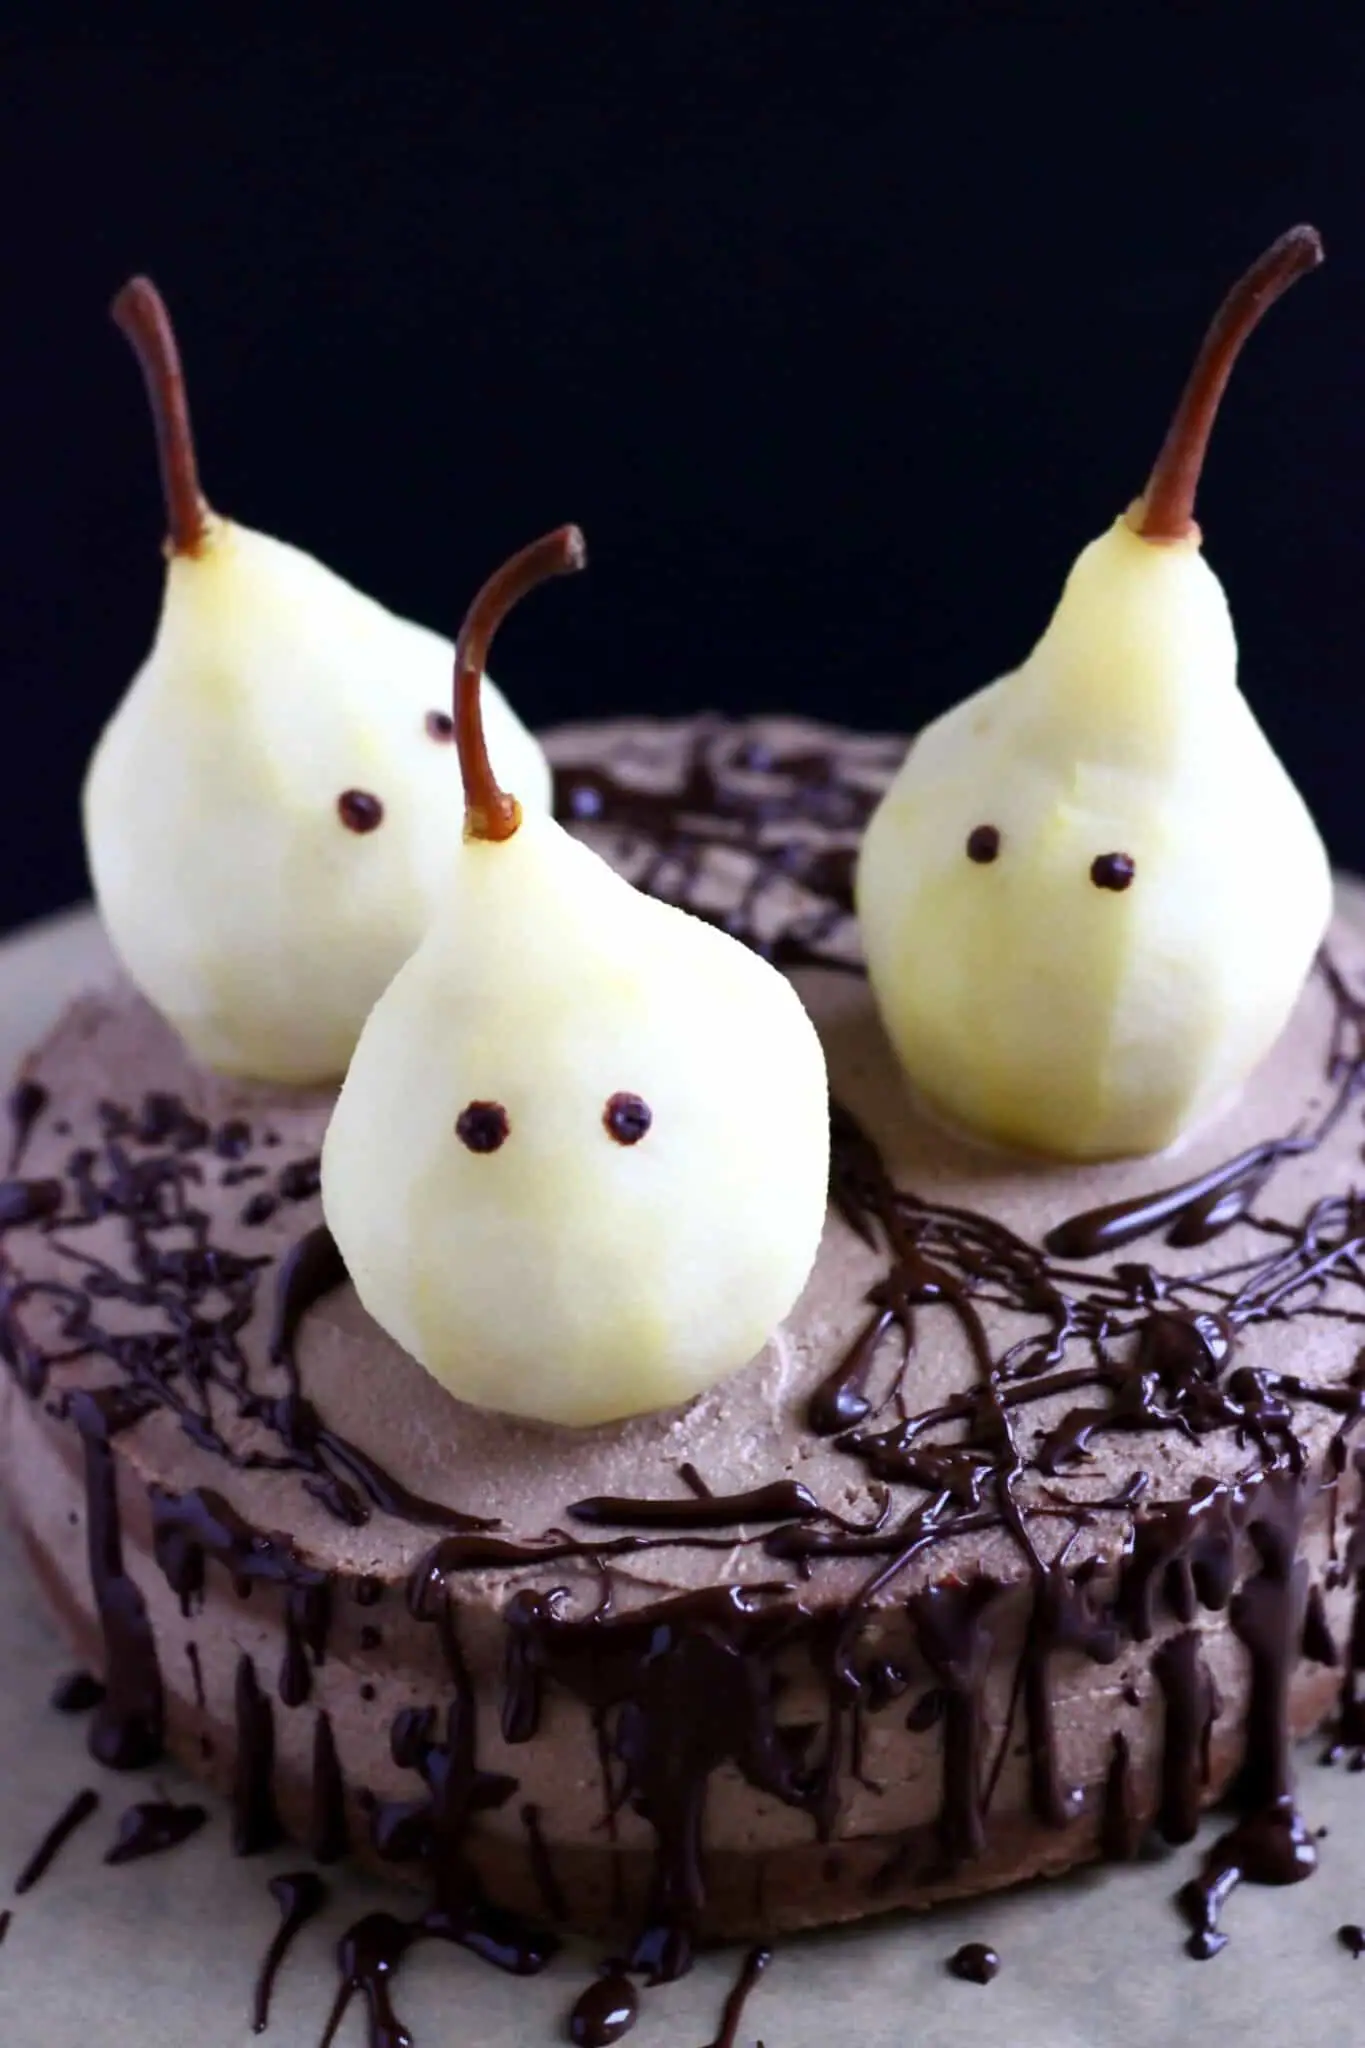 Gluten-free, vegan Halloween ghost cake, decorated with pears.